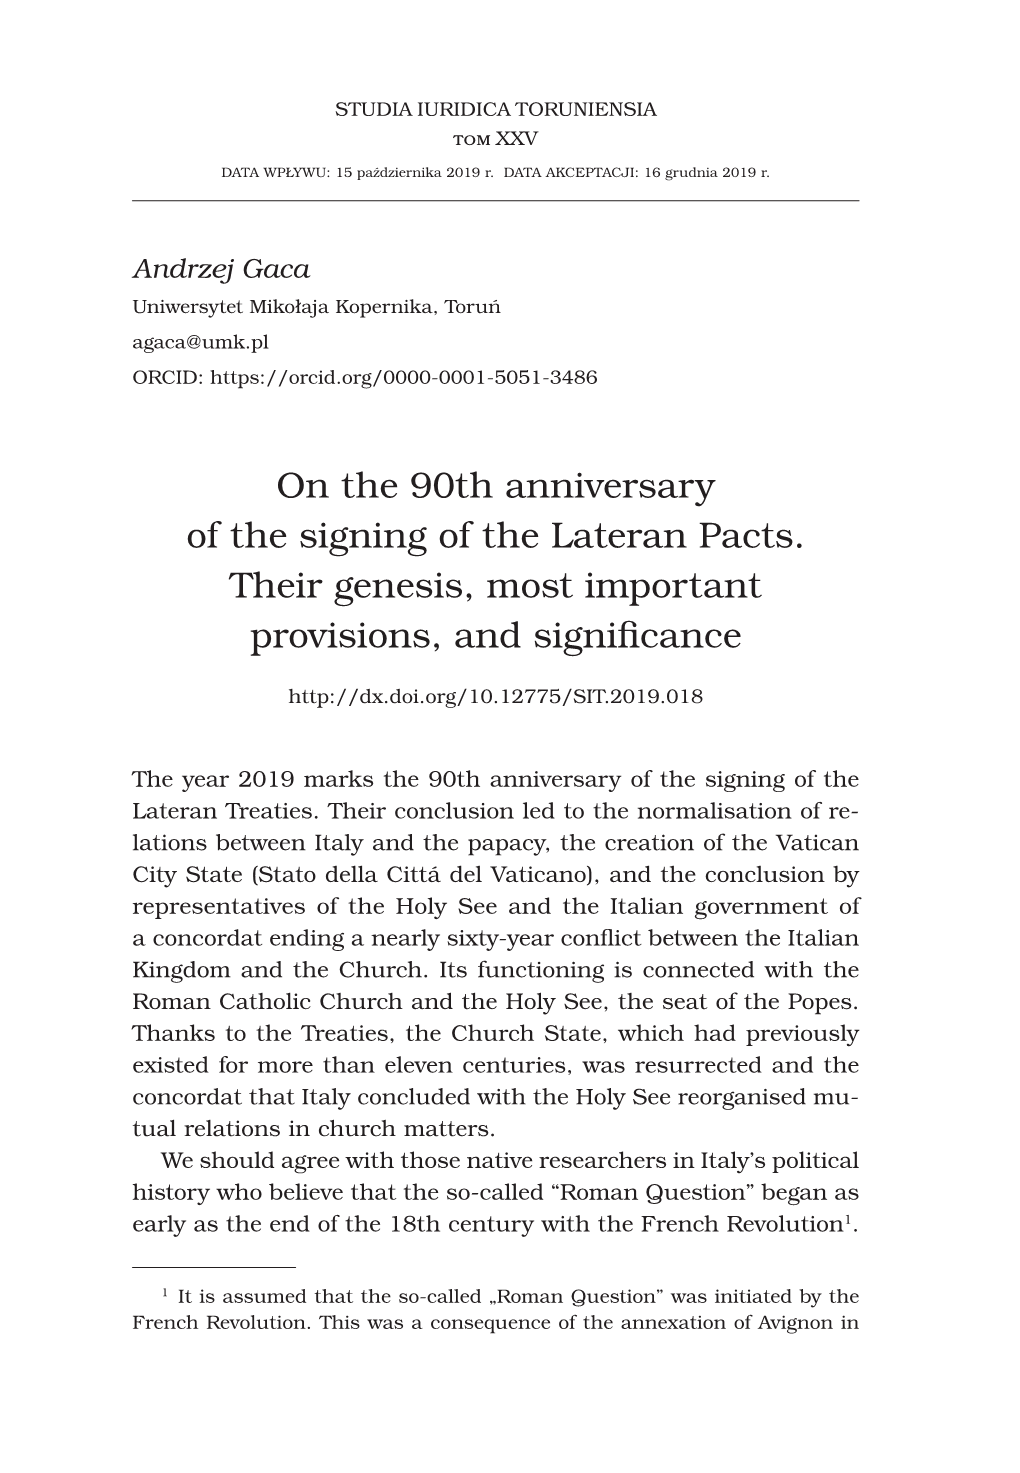 On the 90Th Anniversary of the Signing of the Lateran Pacts. Their Genesis, Most Important Provisions, and Significance